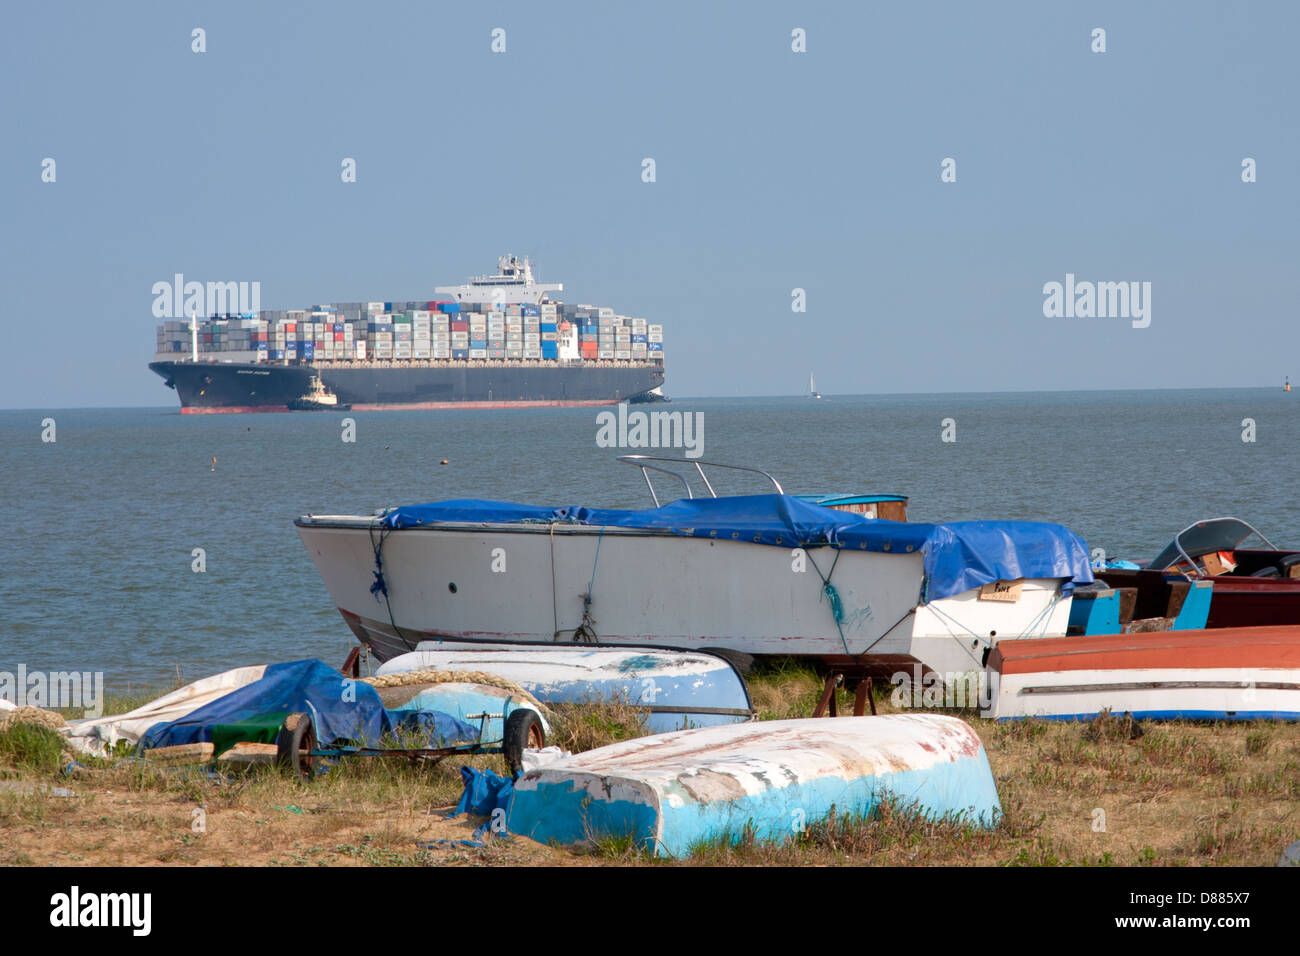 A container ship enters the port of Felixstowe, viewed from Harwich Stock Photo